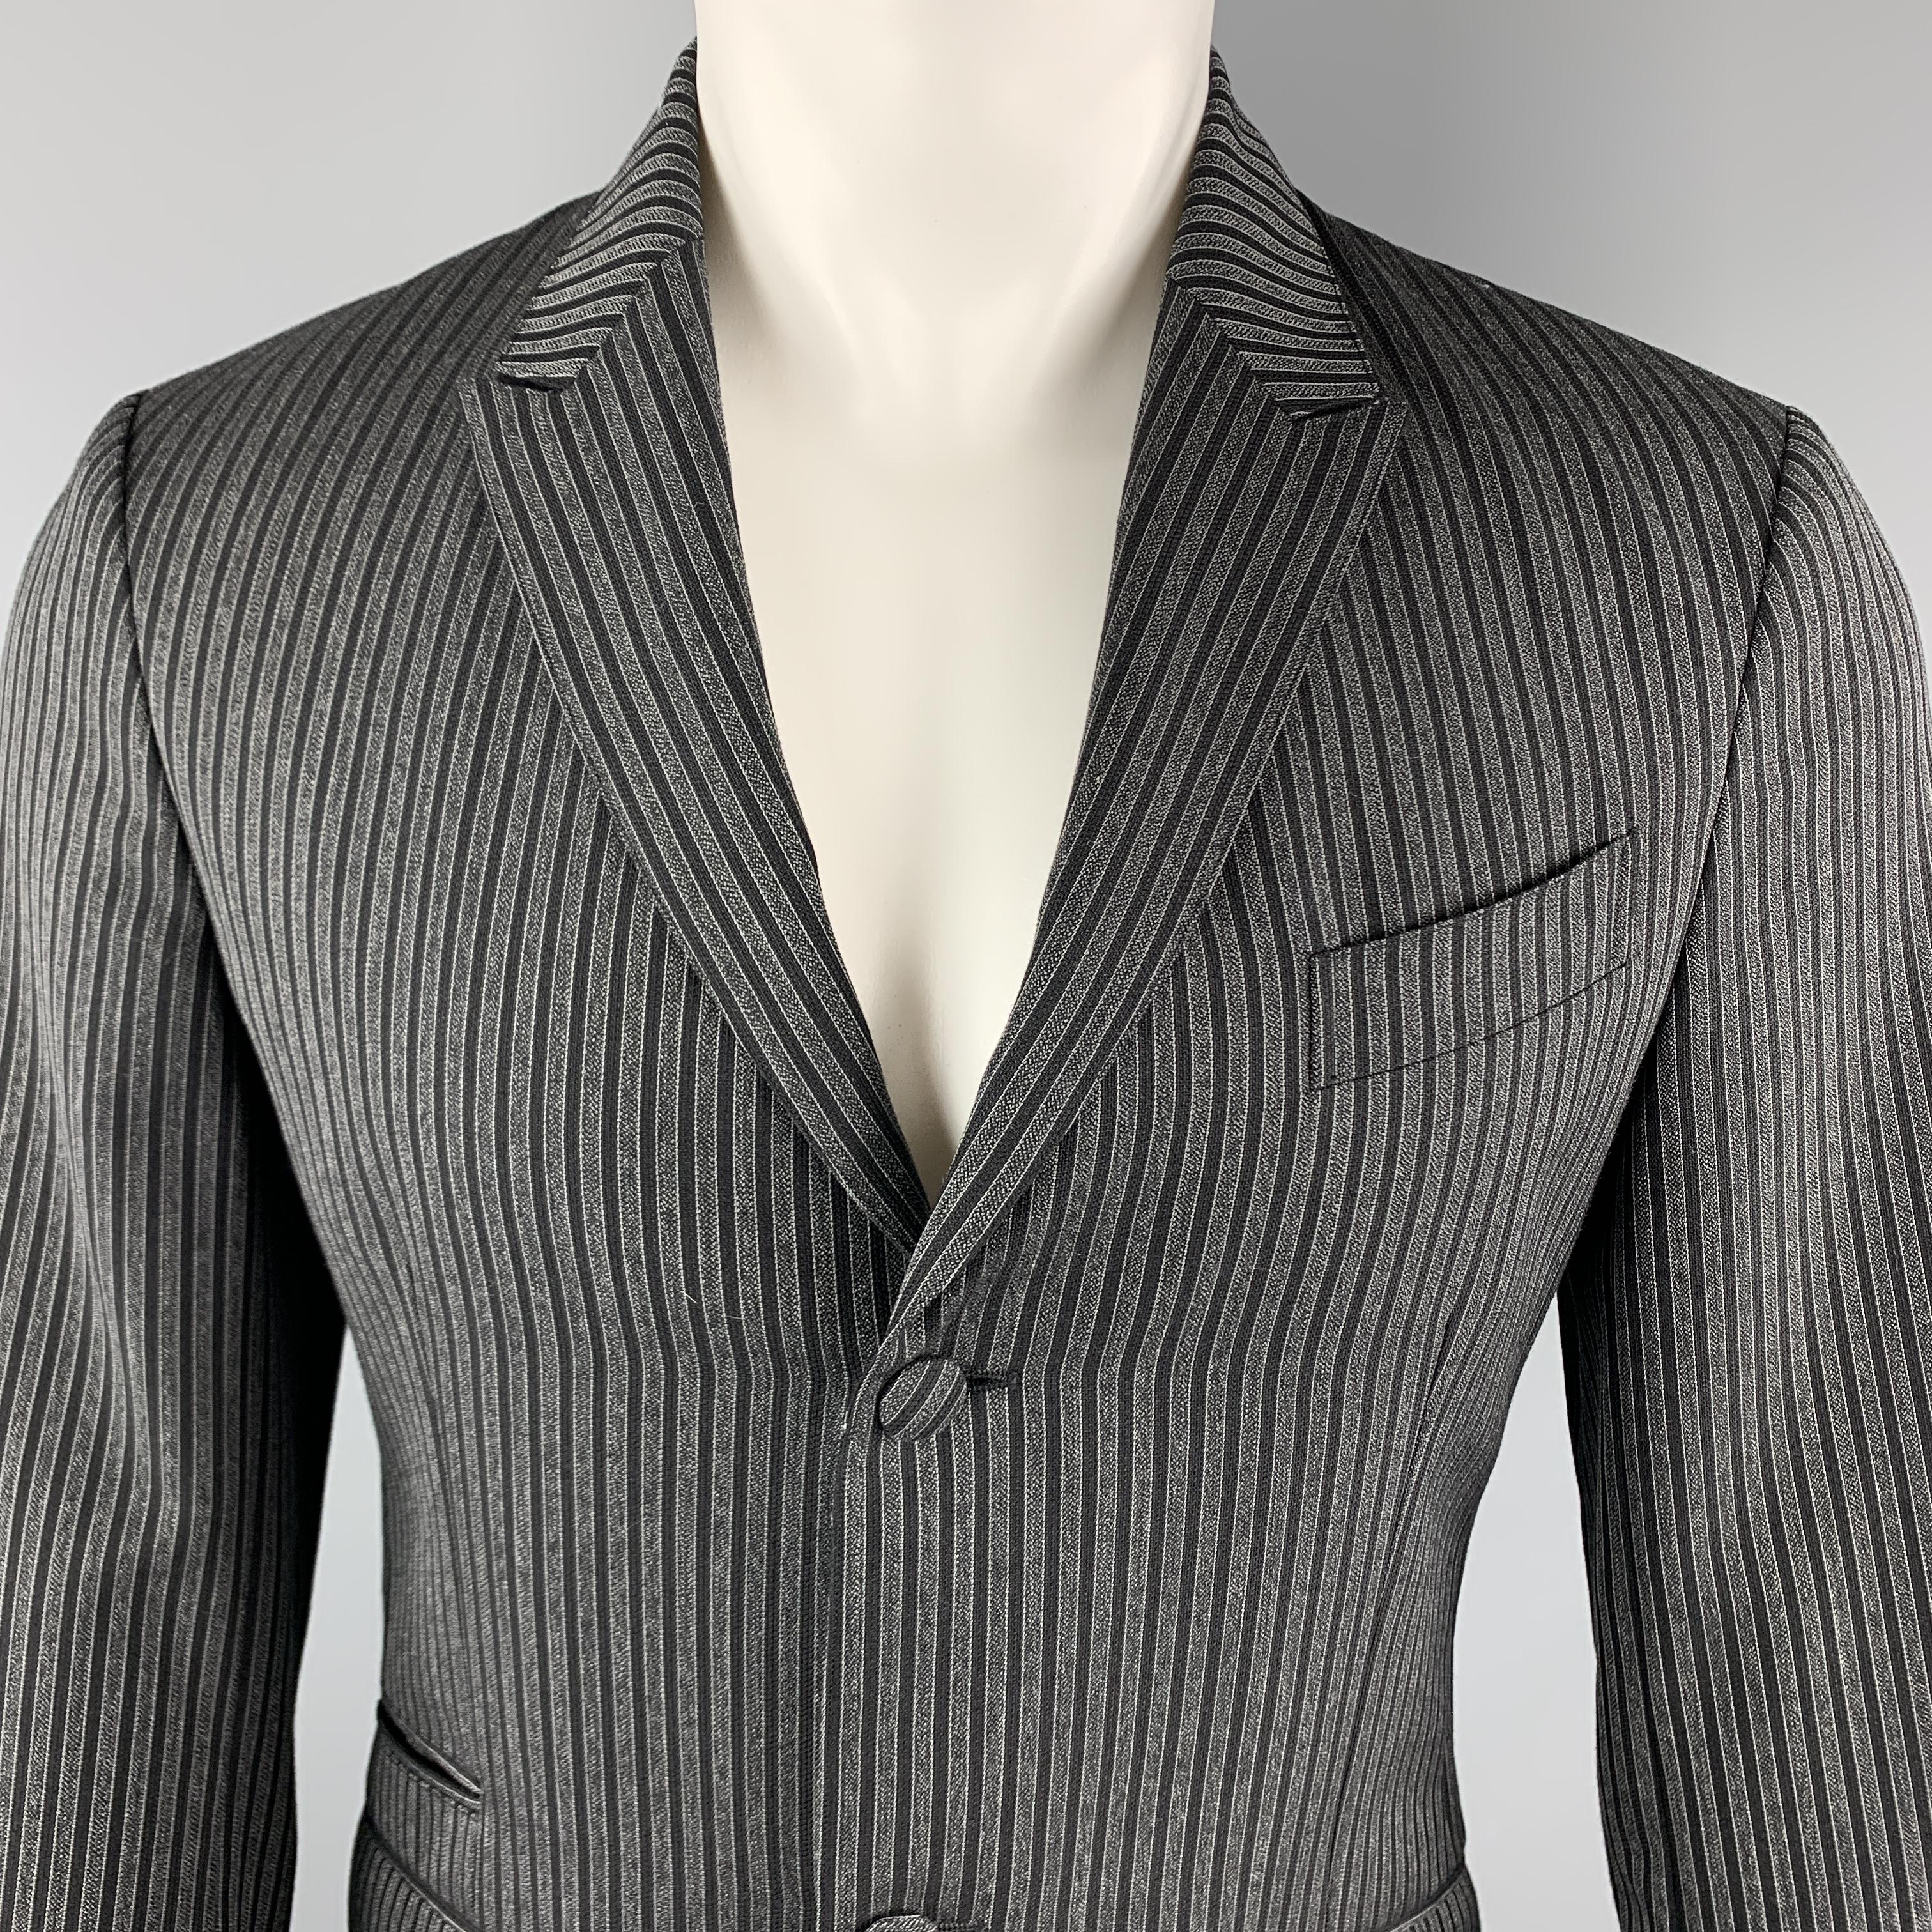 PRADA Sport Coat comes in charcoal and black vertical striped wool / mohair material, featuring a peak lapel, two buttons at closure, single breasted, slit and flap pockets, buttoned cuffs, and a single vent at back. Made in Italy. 

Excellent